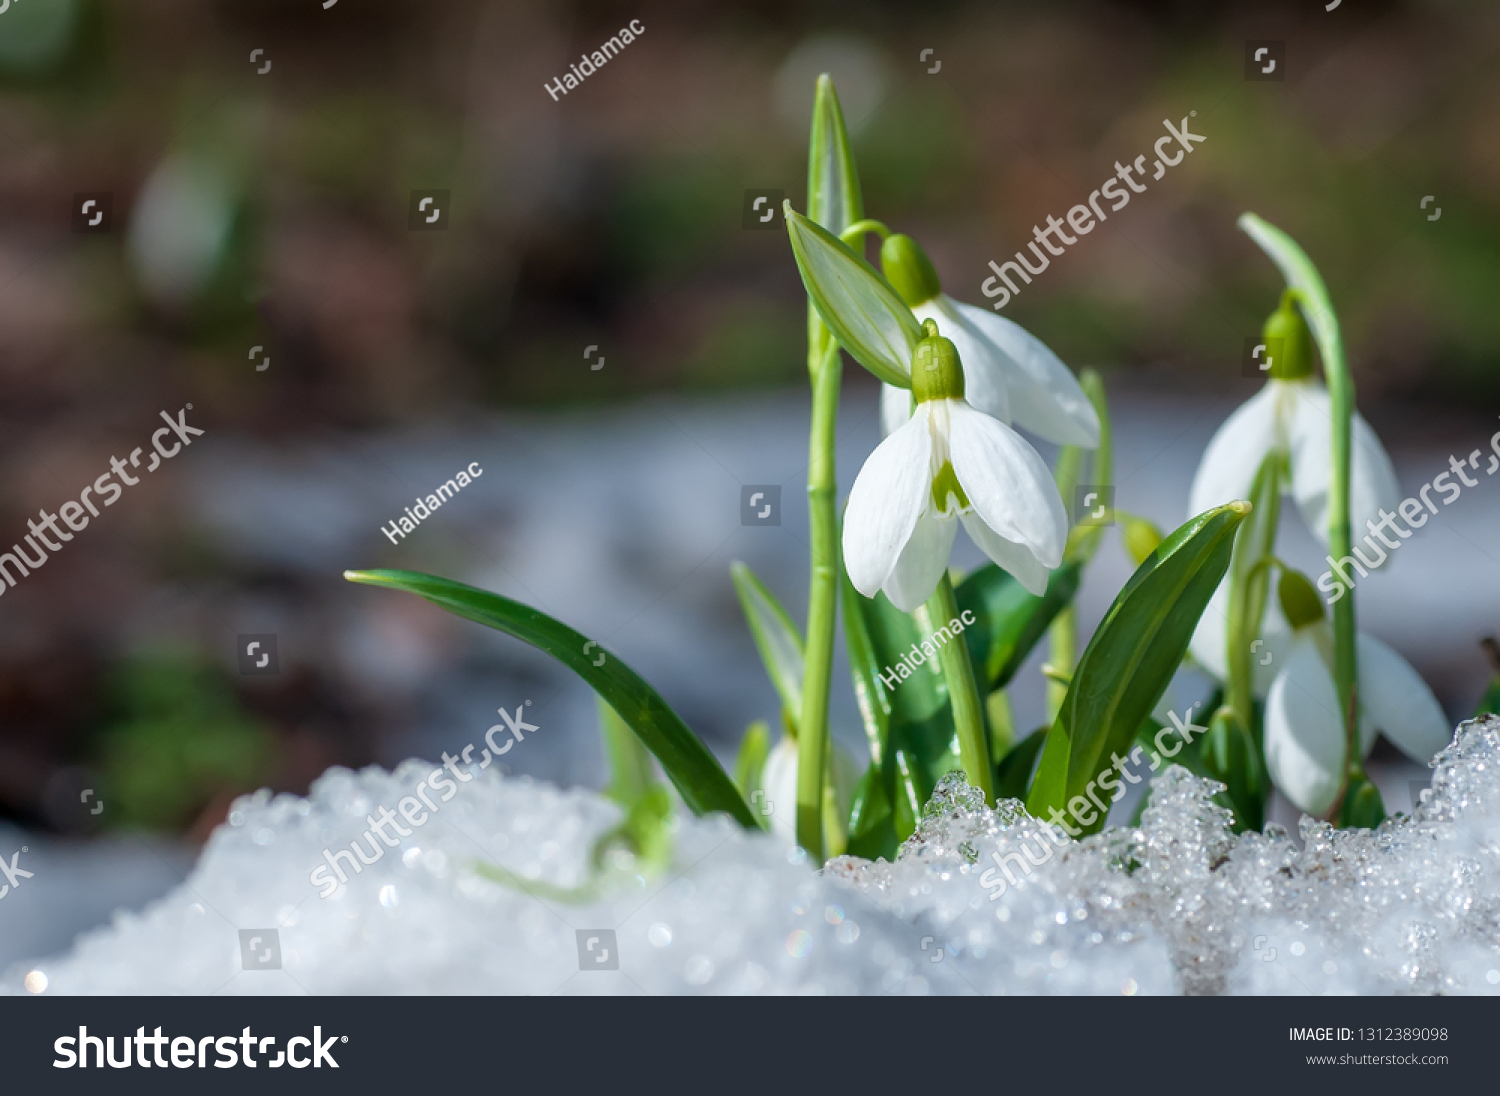 Beautifull snowdrop flower growing in snow in early spring forest. Tender spring flowers snowdrops harbingers of warming symbolize the arrival of spring #1312389098